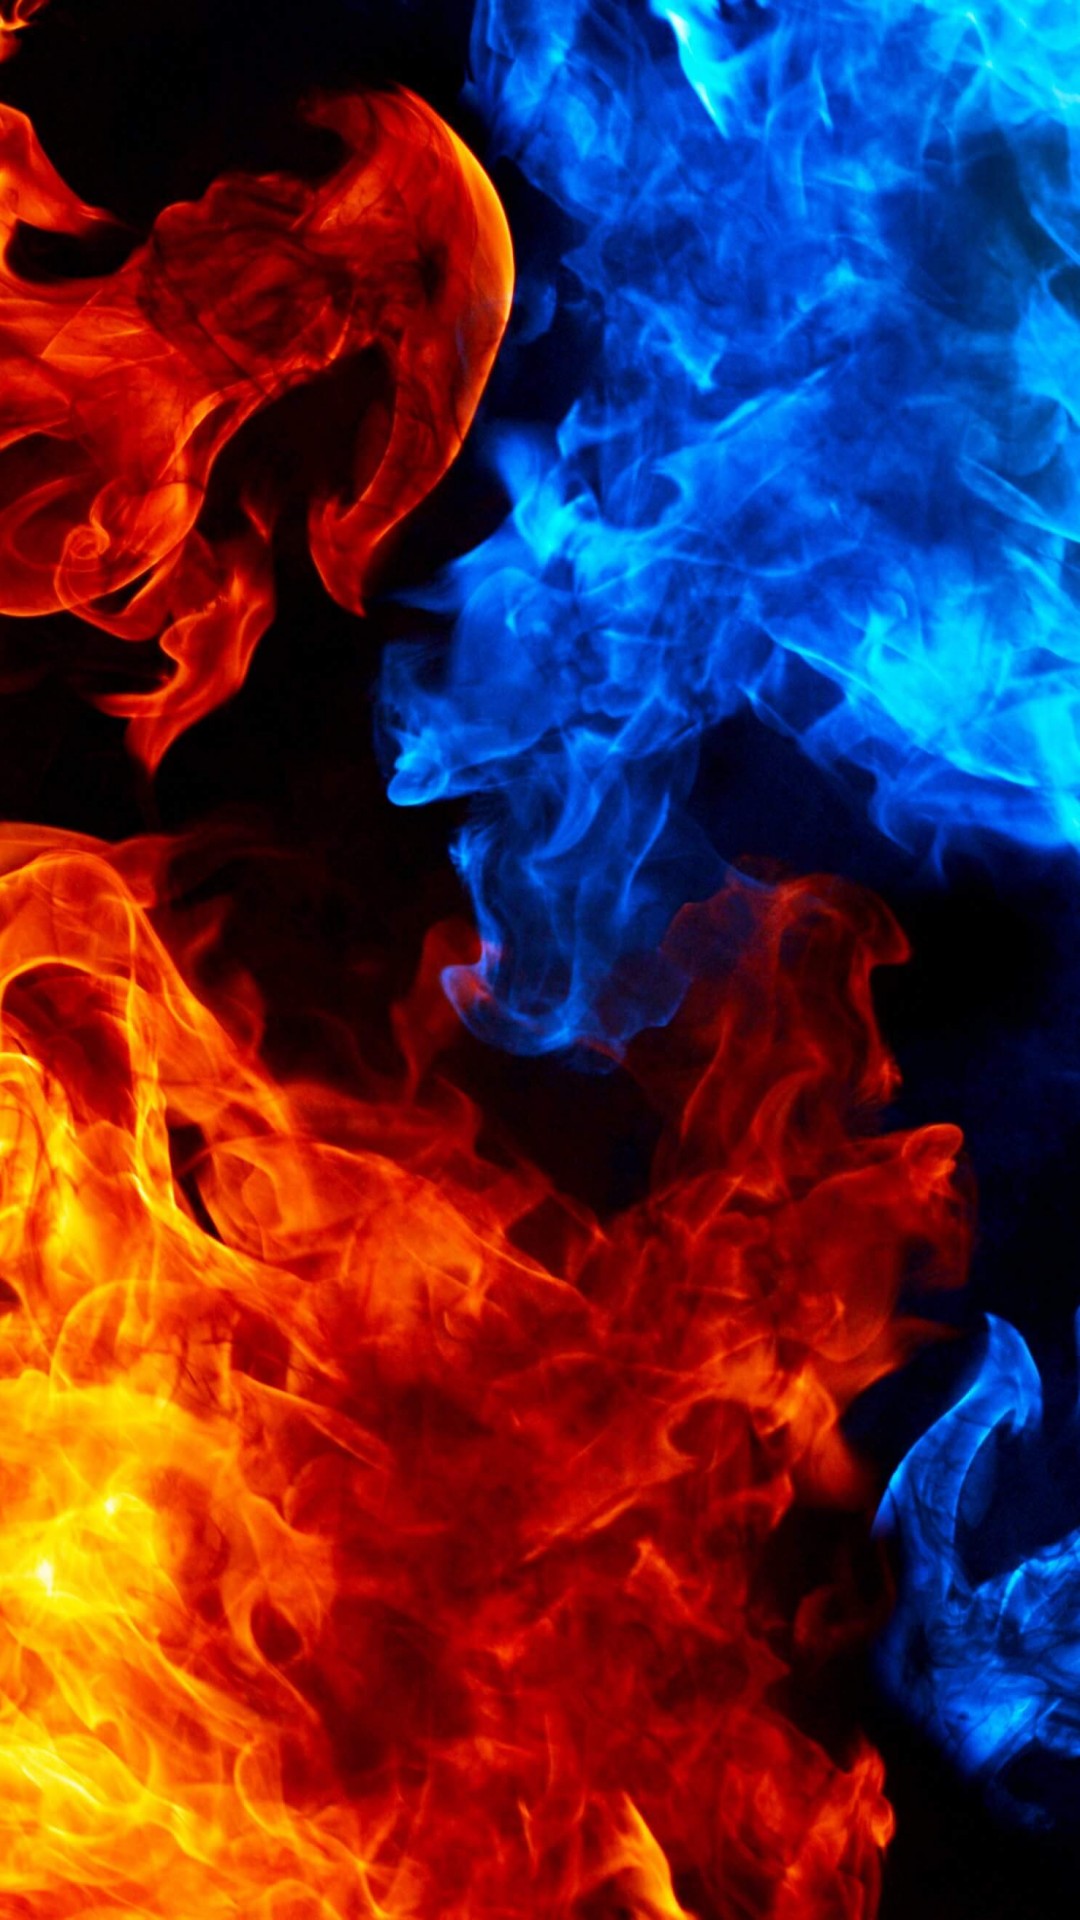 Download Blue And Red Fire HD wallpaper for Moto X   HDwallpapersnet 1080x1920